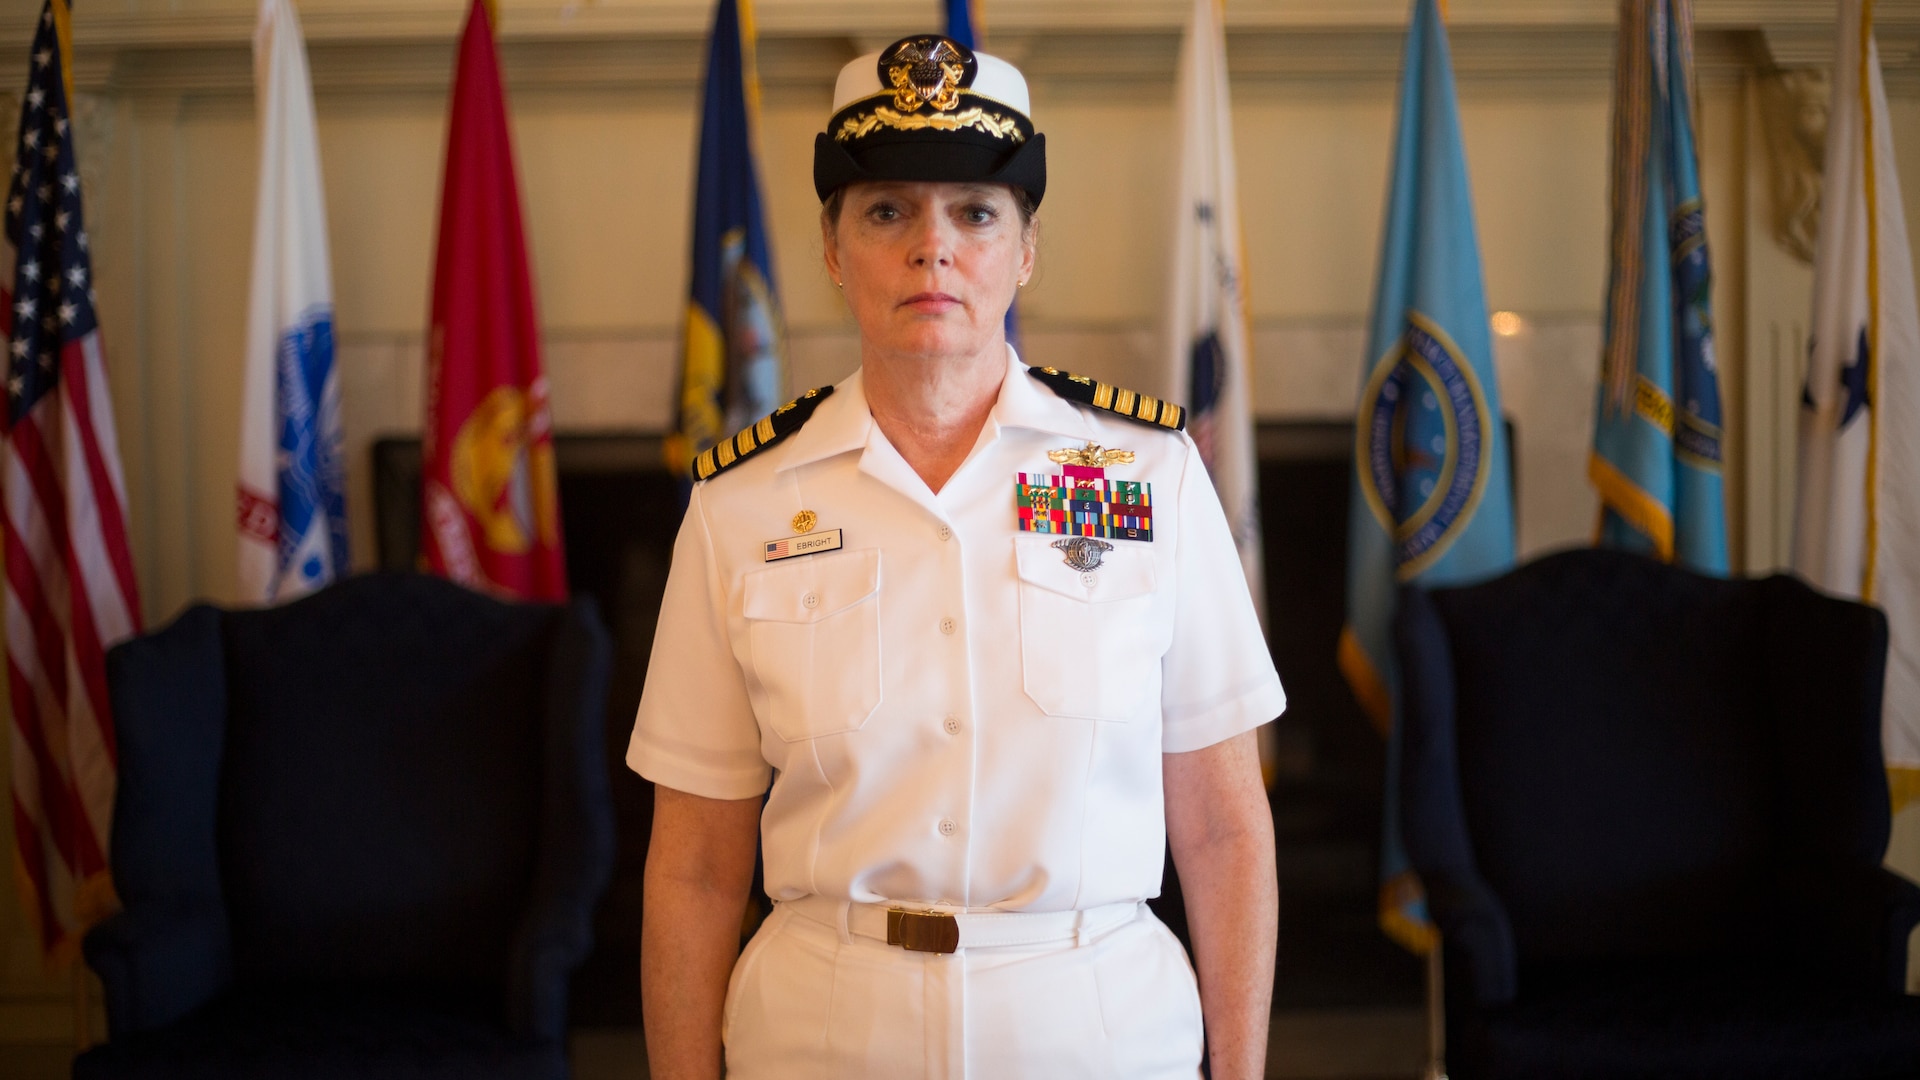 Ebright’s 36 years of service began when she enlisted in the Navy in 1982 as an oceans systems technician analyst prior to becoming a commissioned officer in 1991. She began her career in contracting in 2002 as a contracts supervisor. After several other contracting positions, she closed her Navy career as the commander of DCMA International. (Click next to read more)